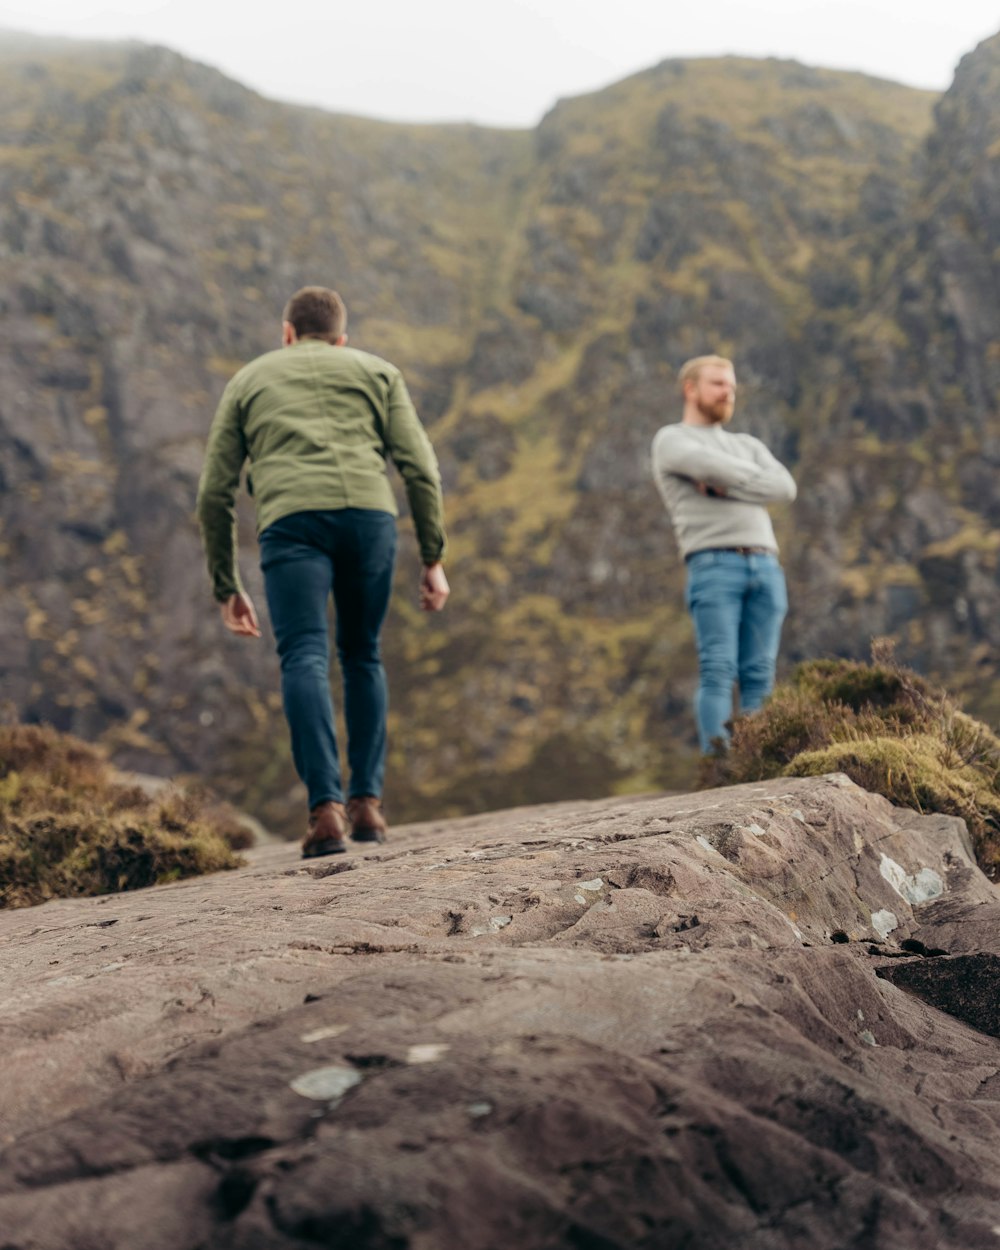 a man and woman walking on a rocky hill